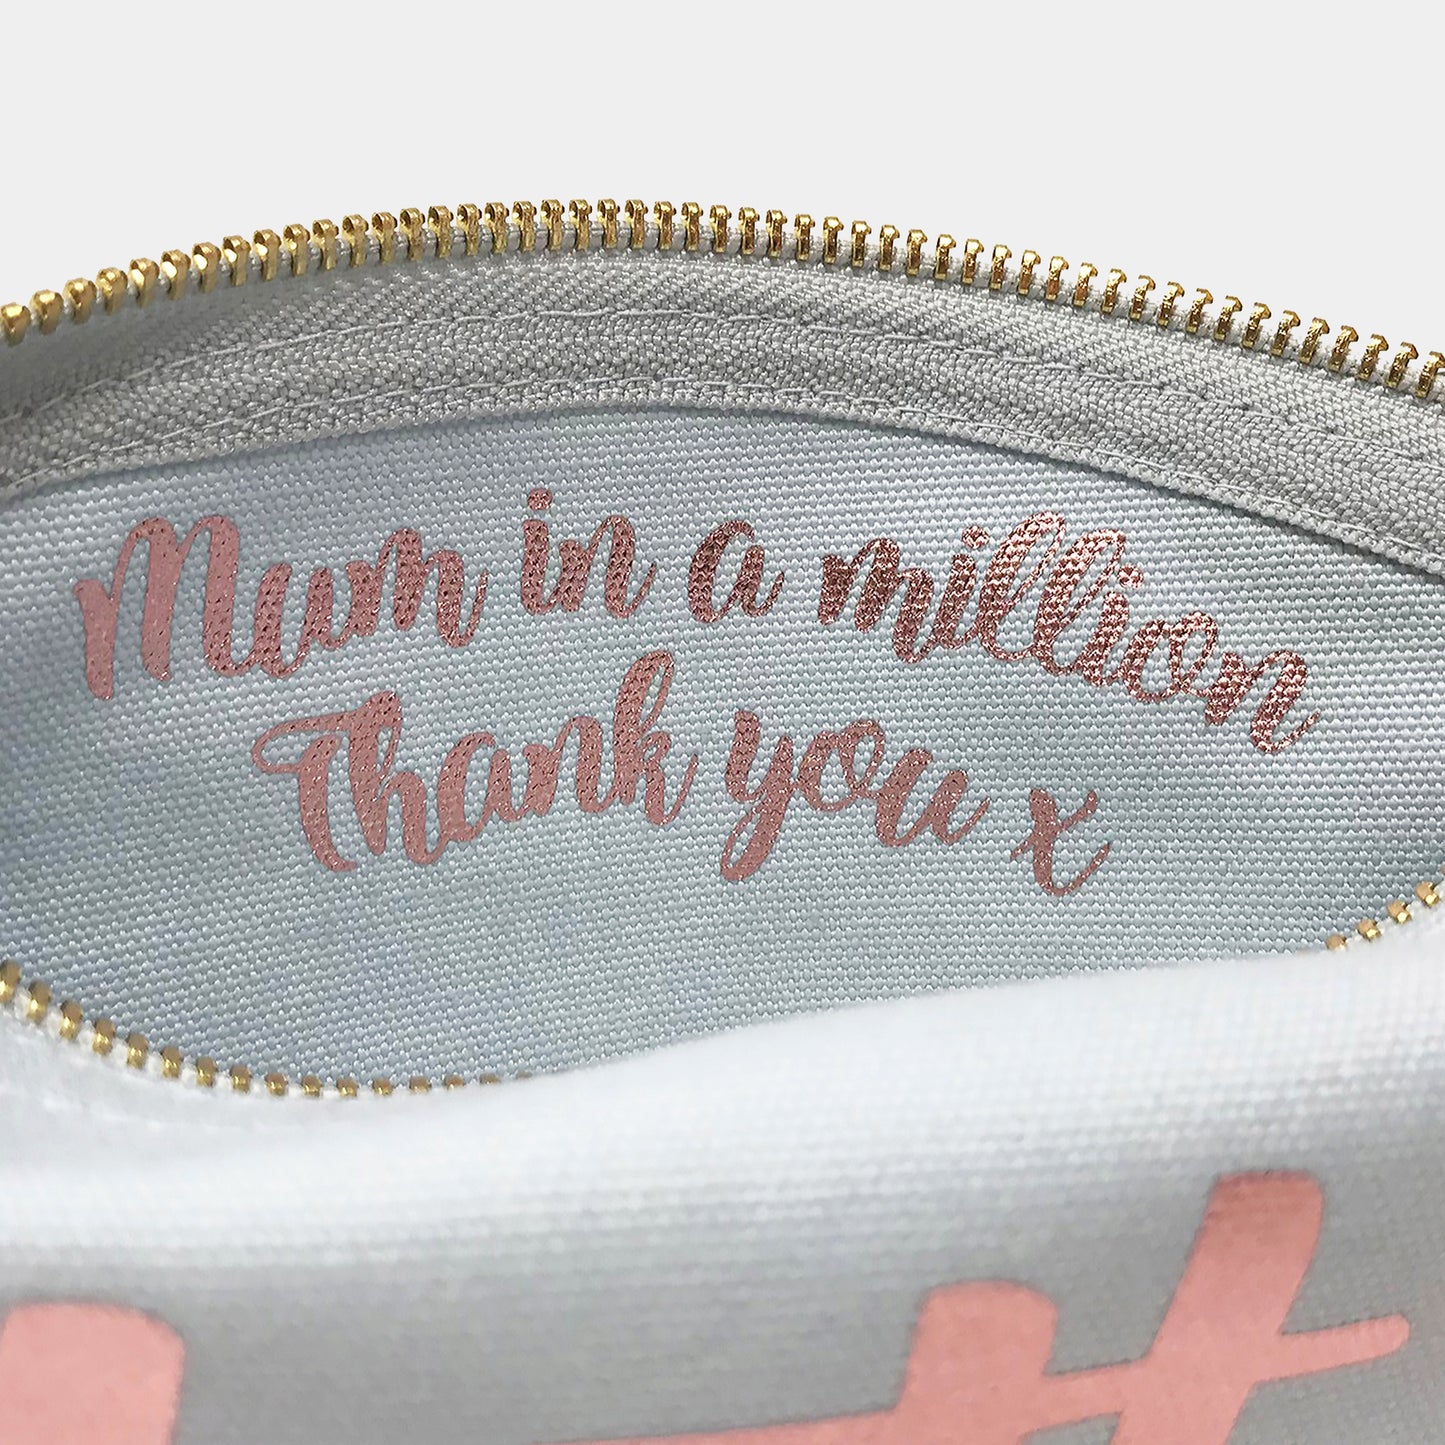 Mother of the Bride Personalised Cometic Bag - FREE UK SHIPPING